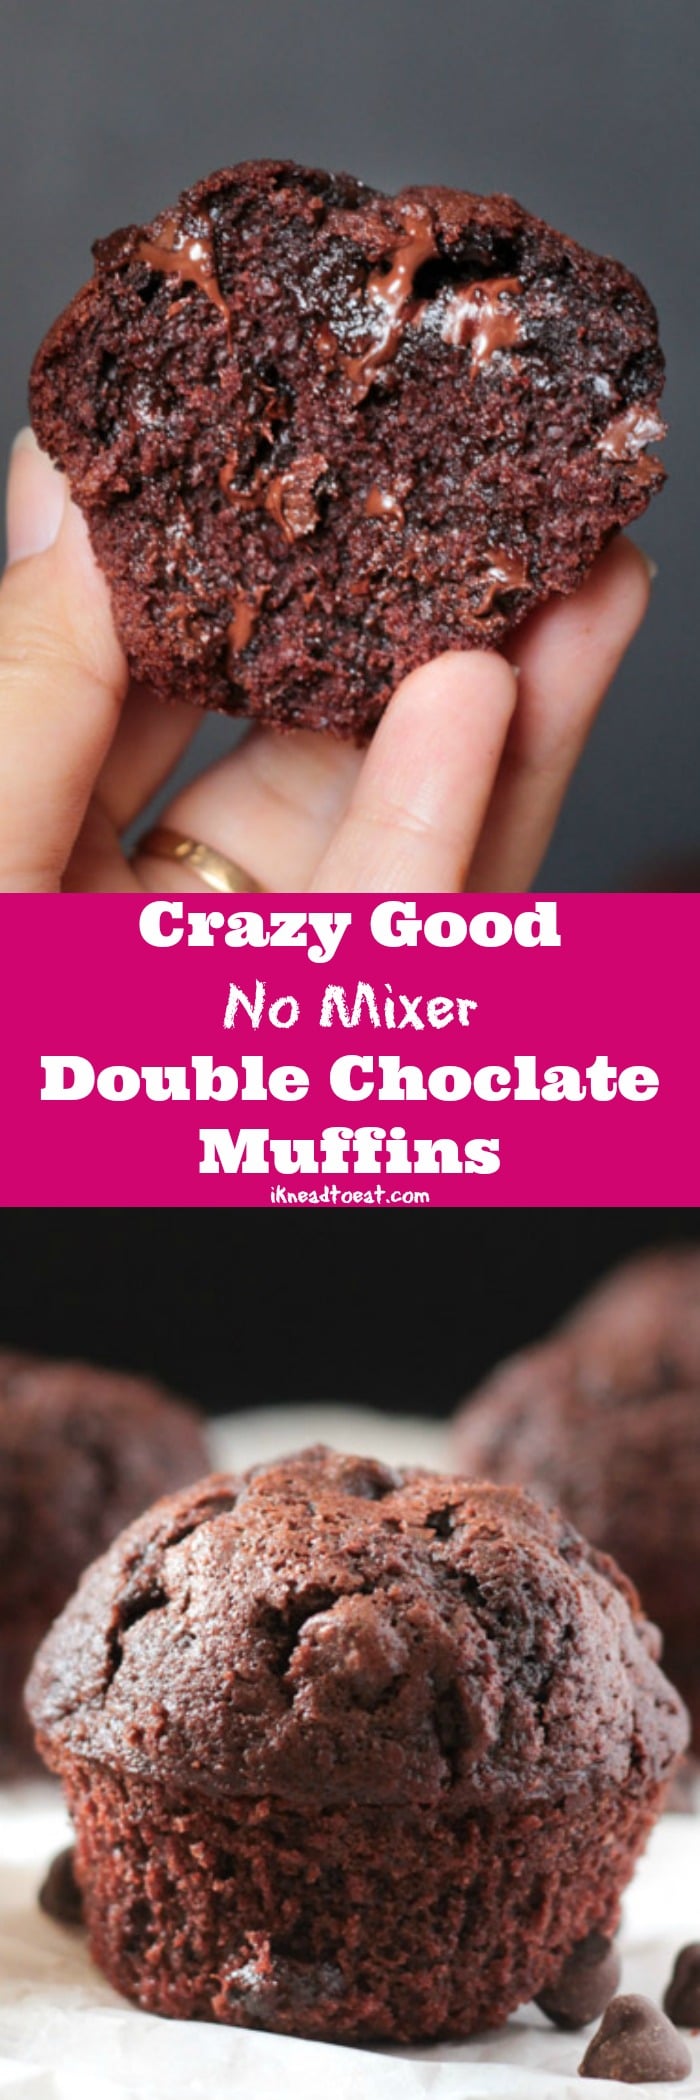 No Mixer Double Chocolate Muffins